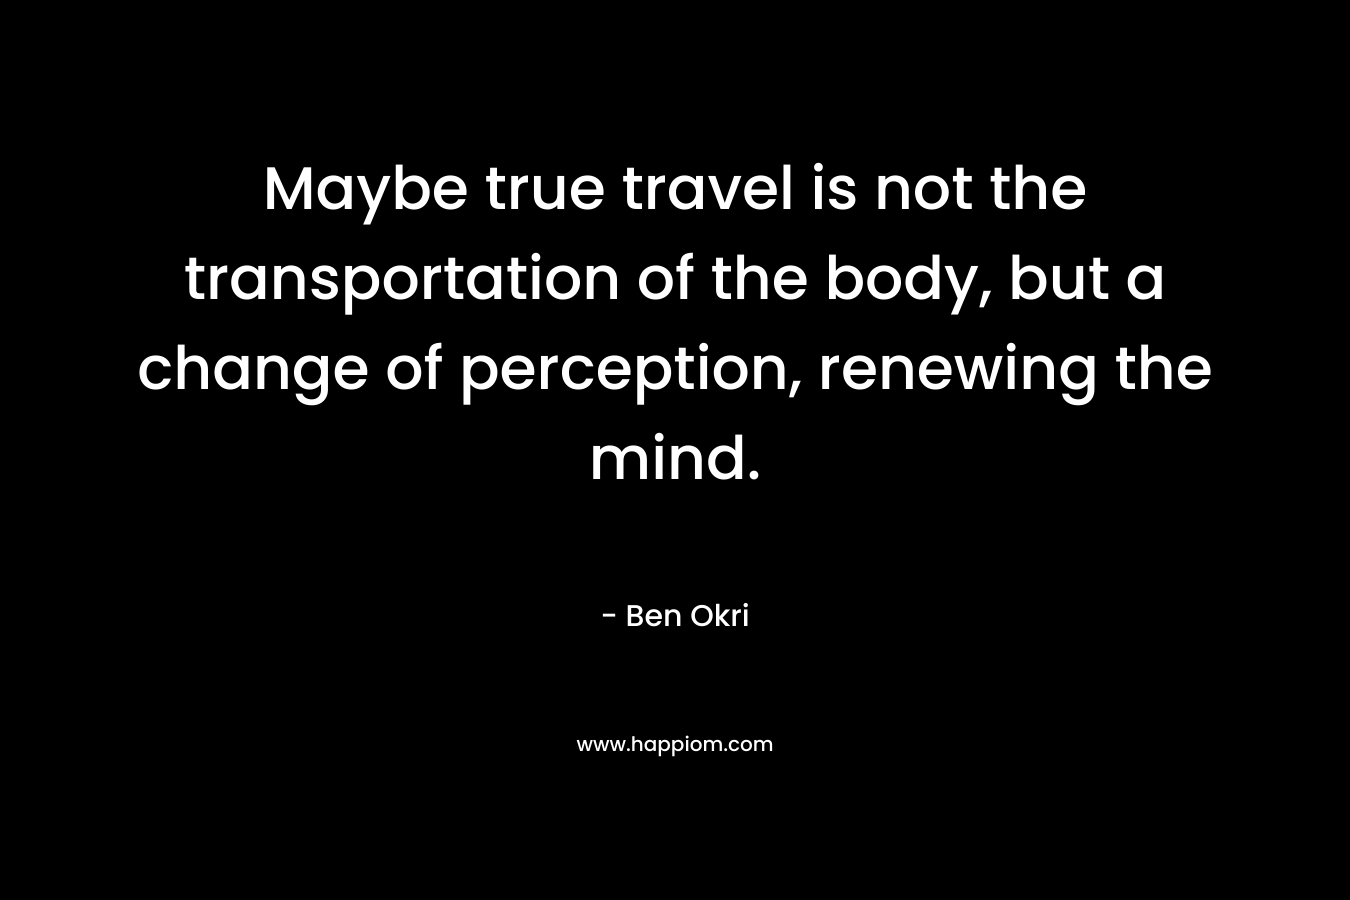 Maybe true travel is not the transportation of the body, but a change of perception, renewing the mind. – Ben Okri